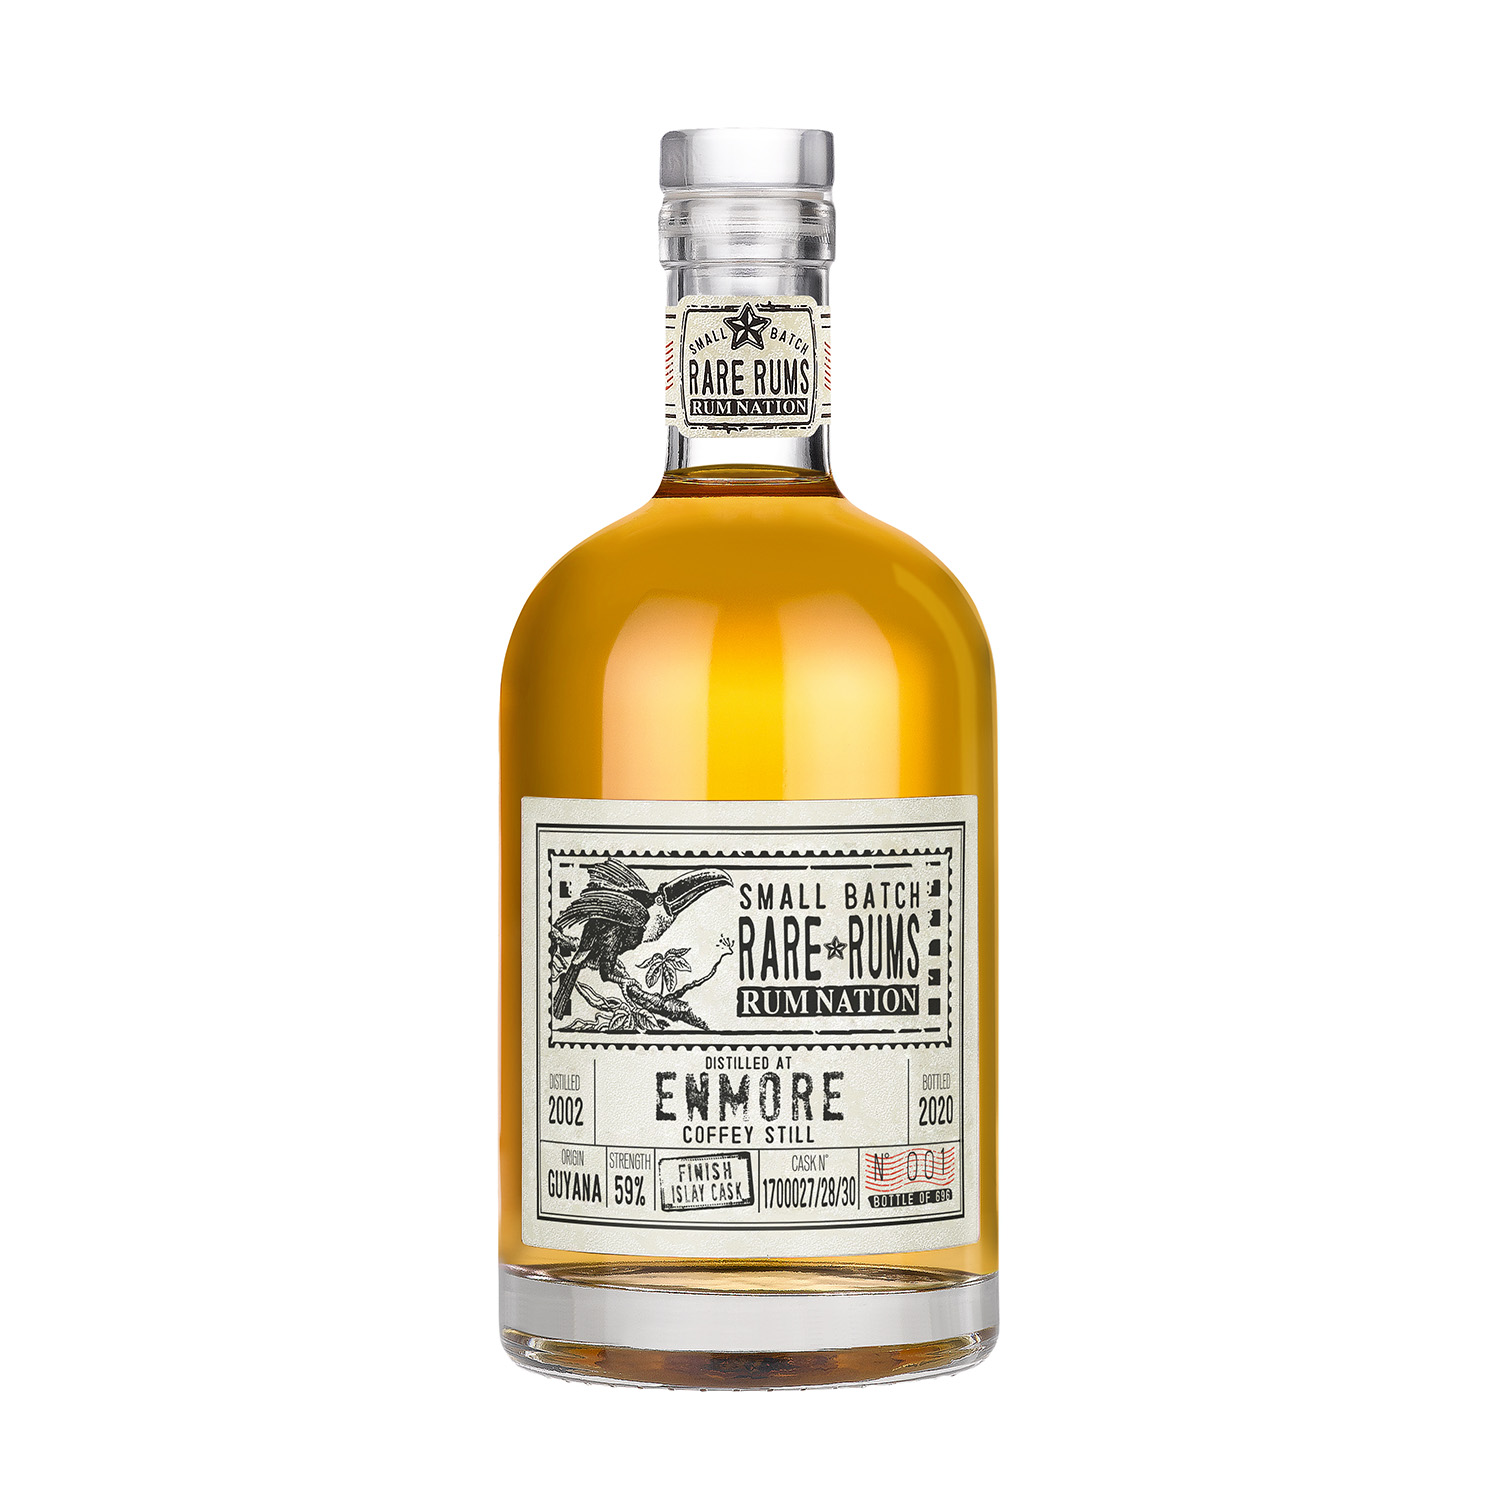 Nation Enmore 18 ans 2002 Islay Cask Finish - 59°